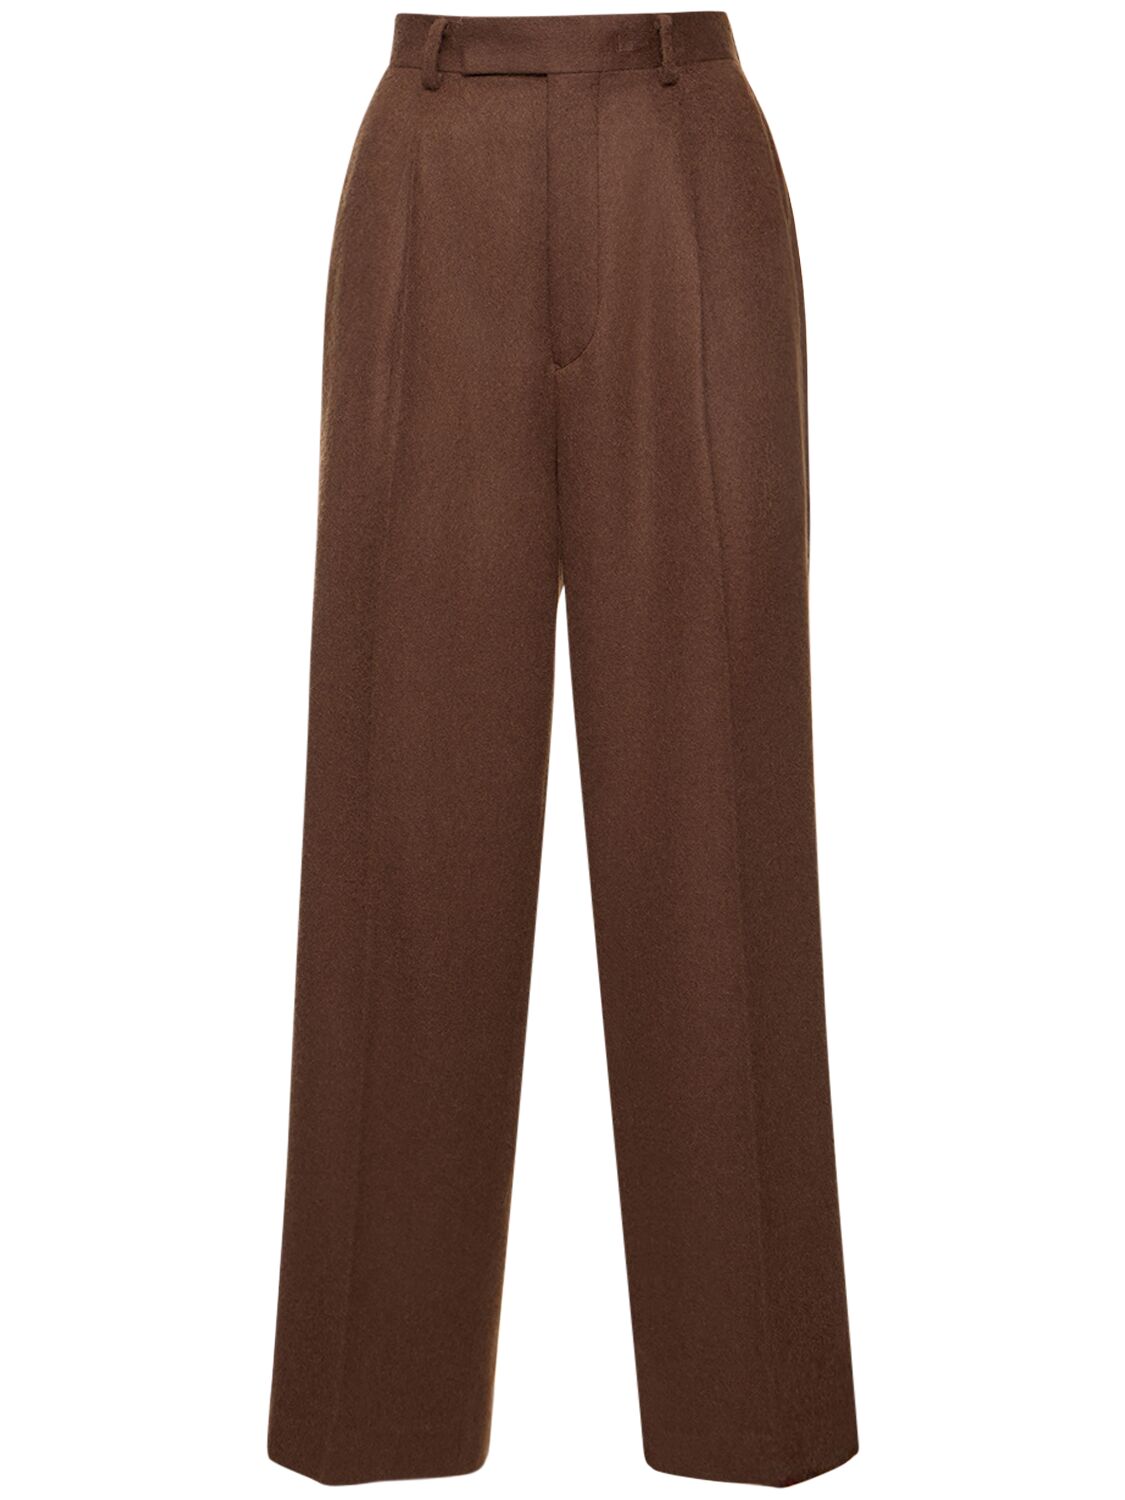 Image of Baby Camel Flannel Pants